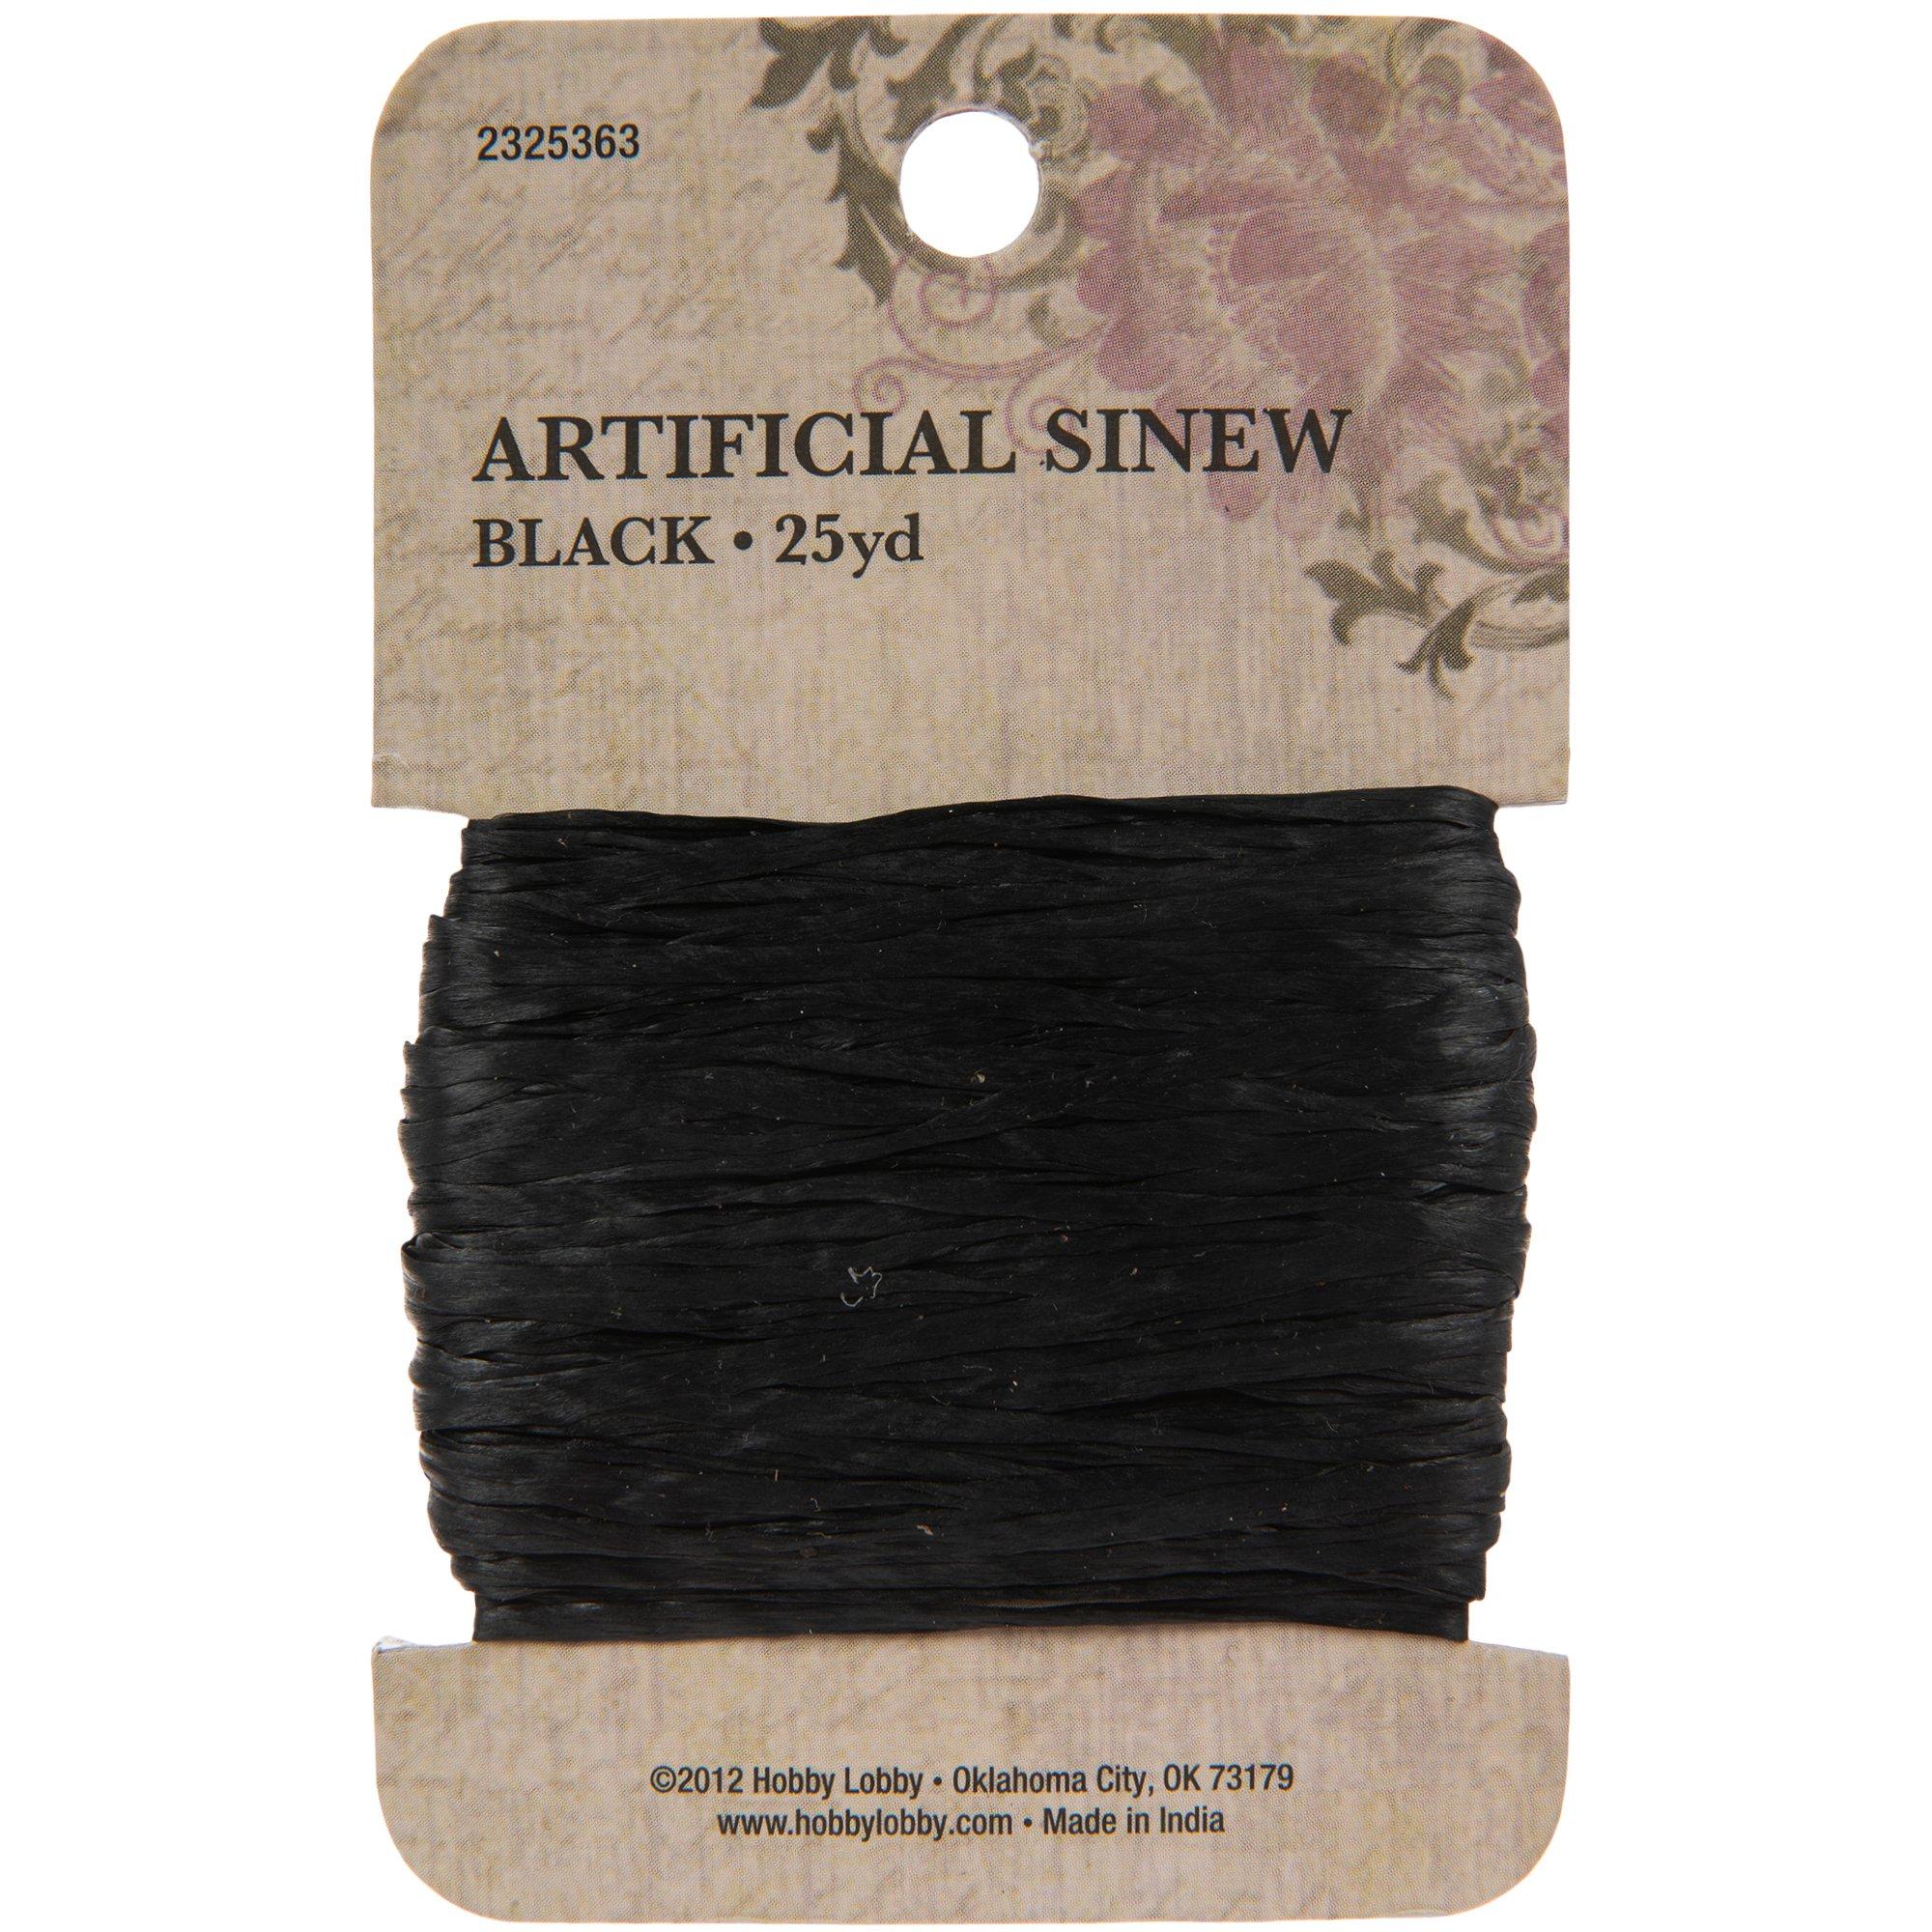 Natural Artificial Sinew, Hobby Lobby